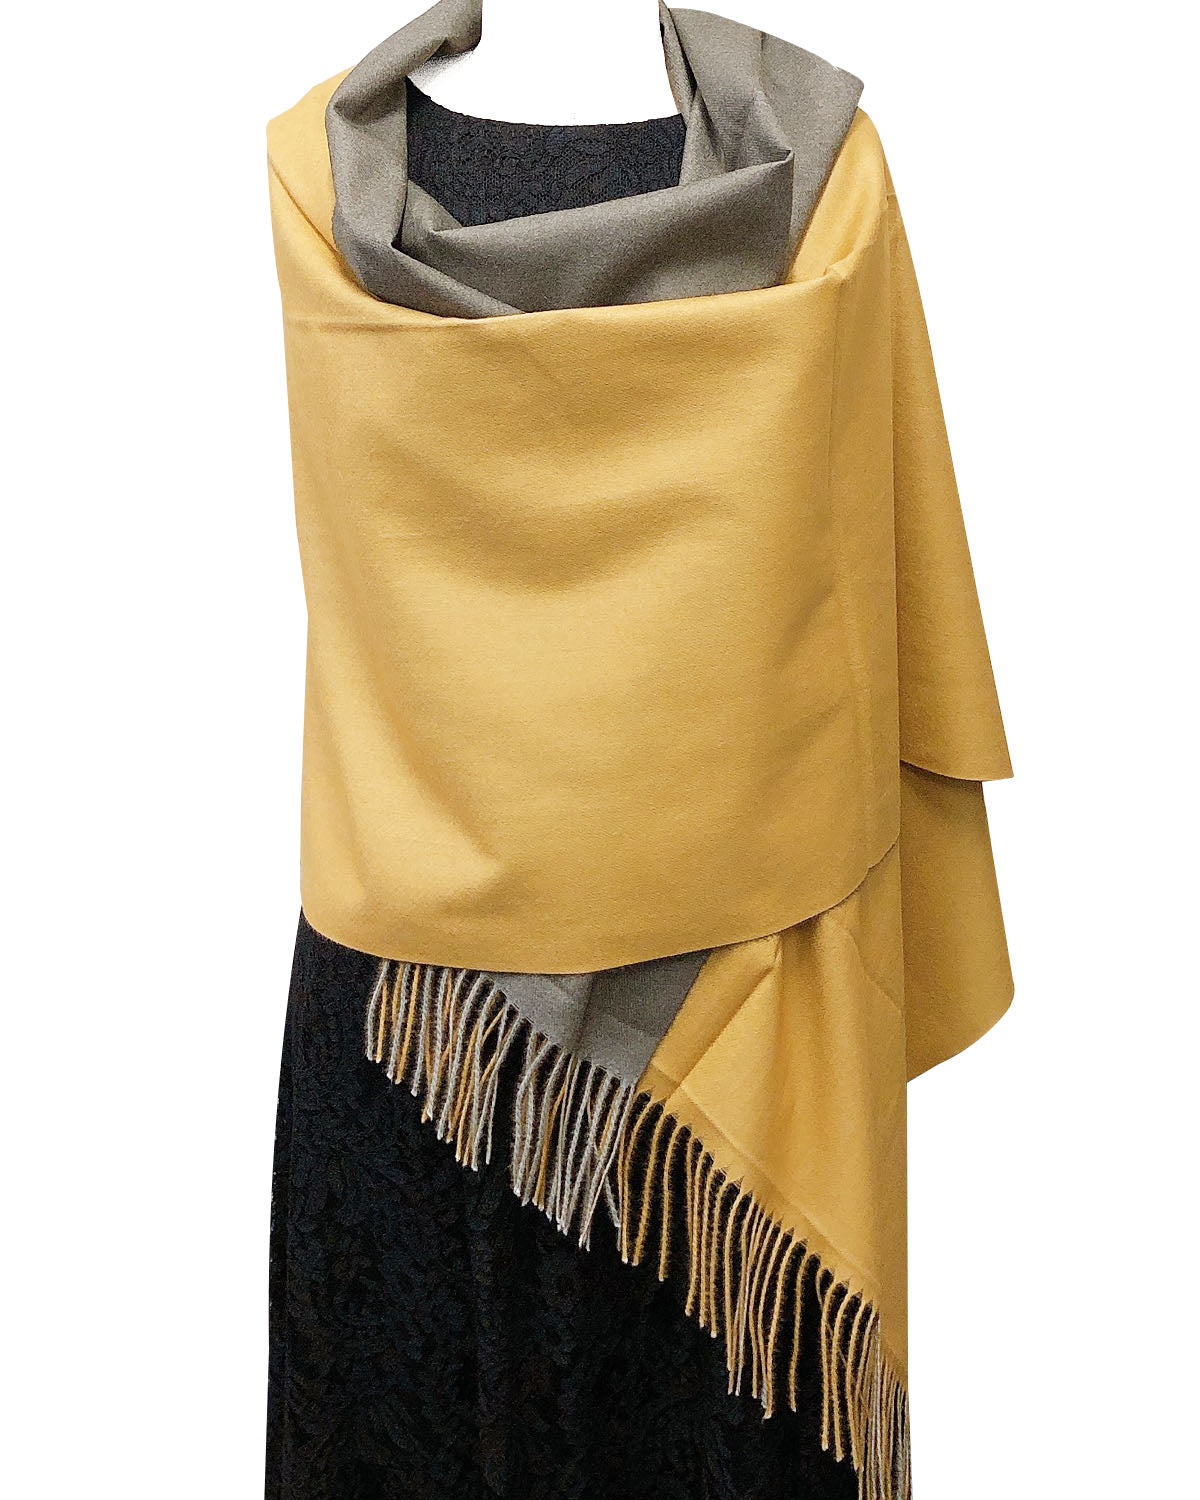 Wrapables Soft Cashmere-Feeling Lightweight Scarf, Large Two-Tone Warm Scarf Wrap Shawl for Winter